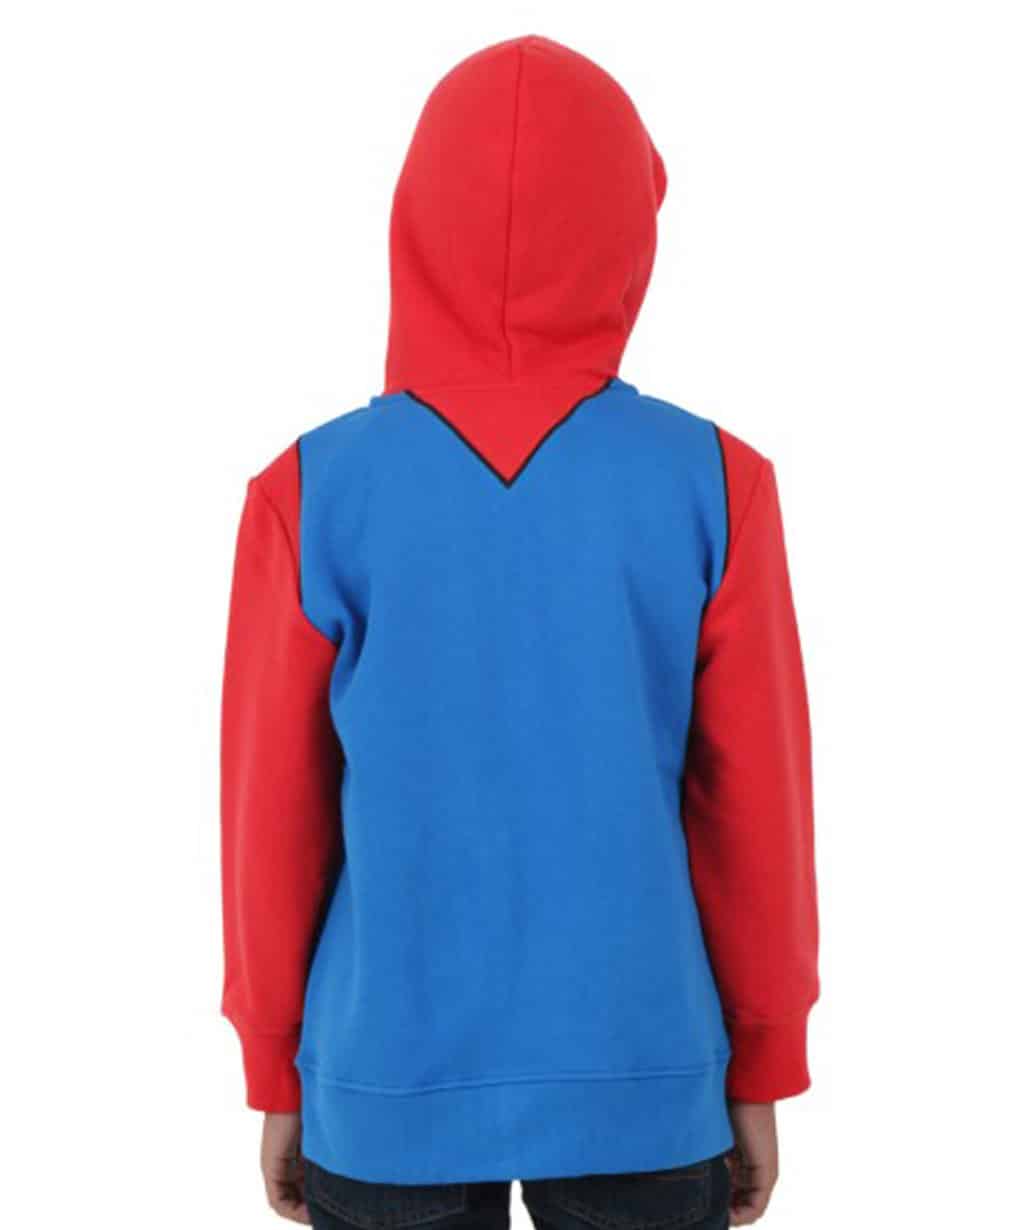 Super-Mario-Bros-Outfit-Red-and-Blue-Hoodie-Back